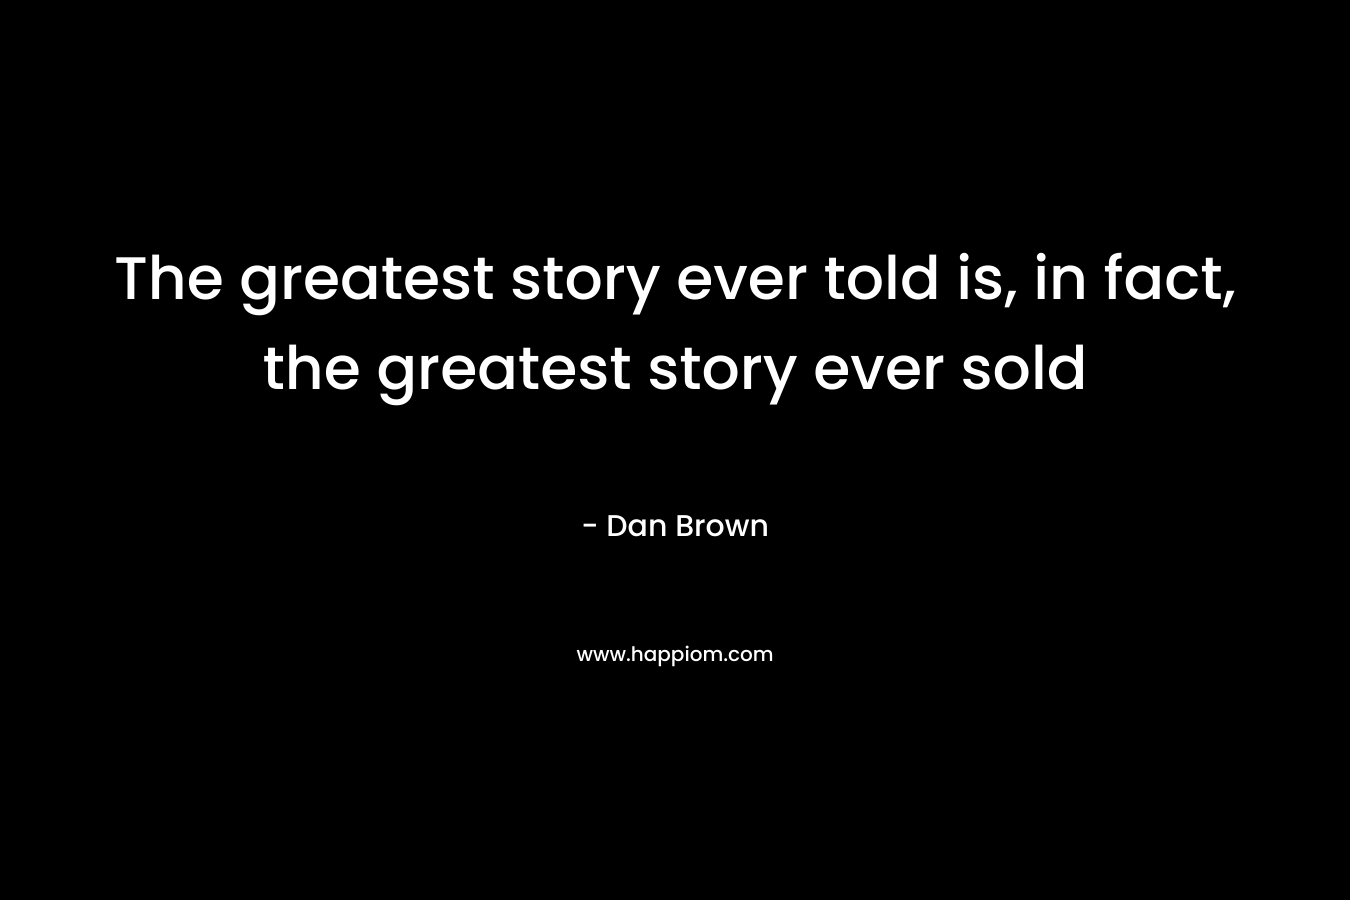 The greatest story ever told is, in fact, the greatest story ever sold